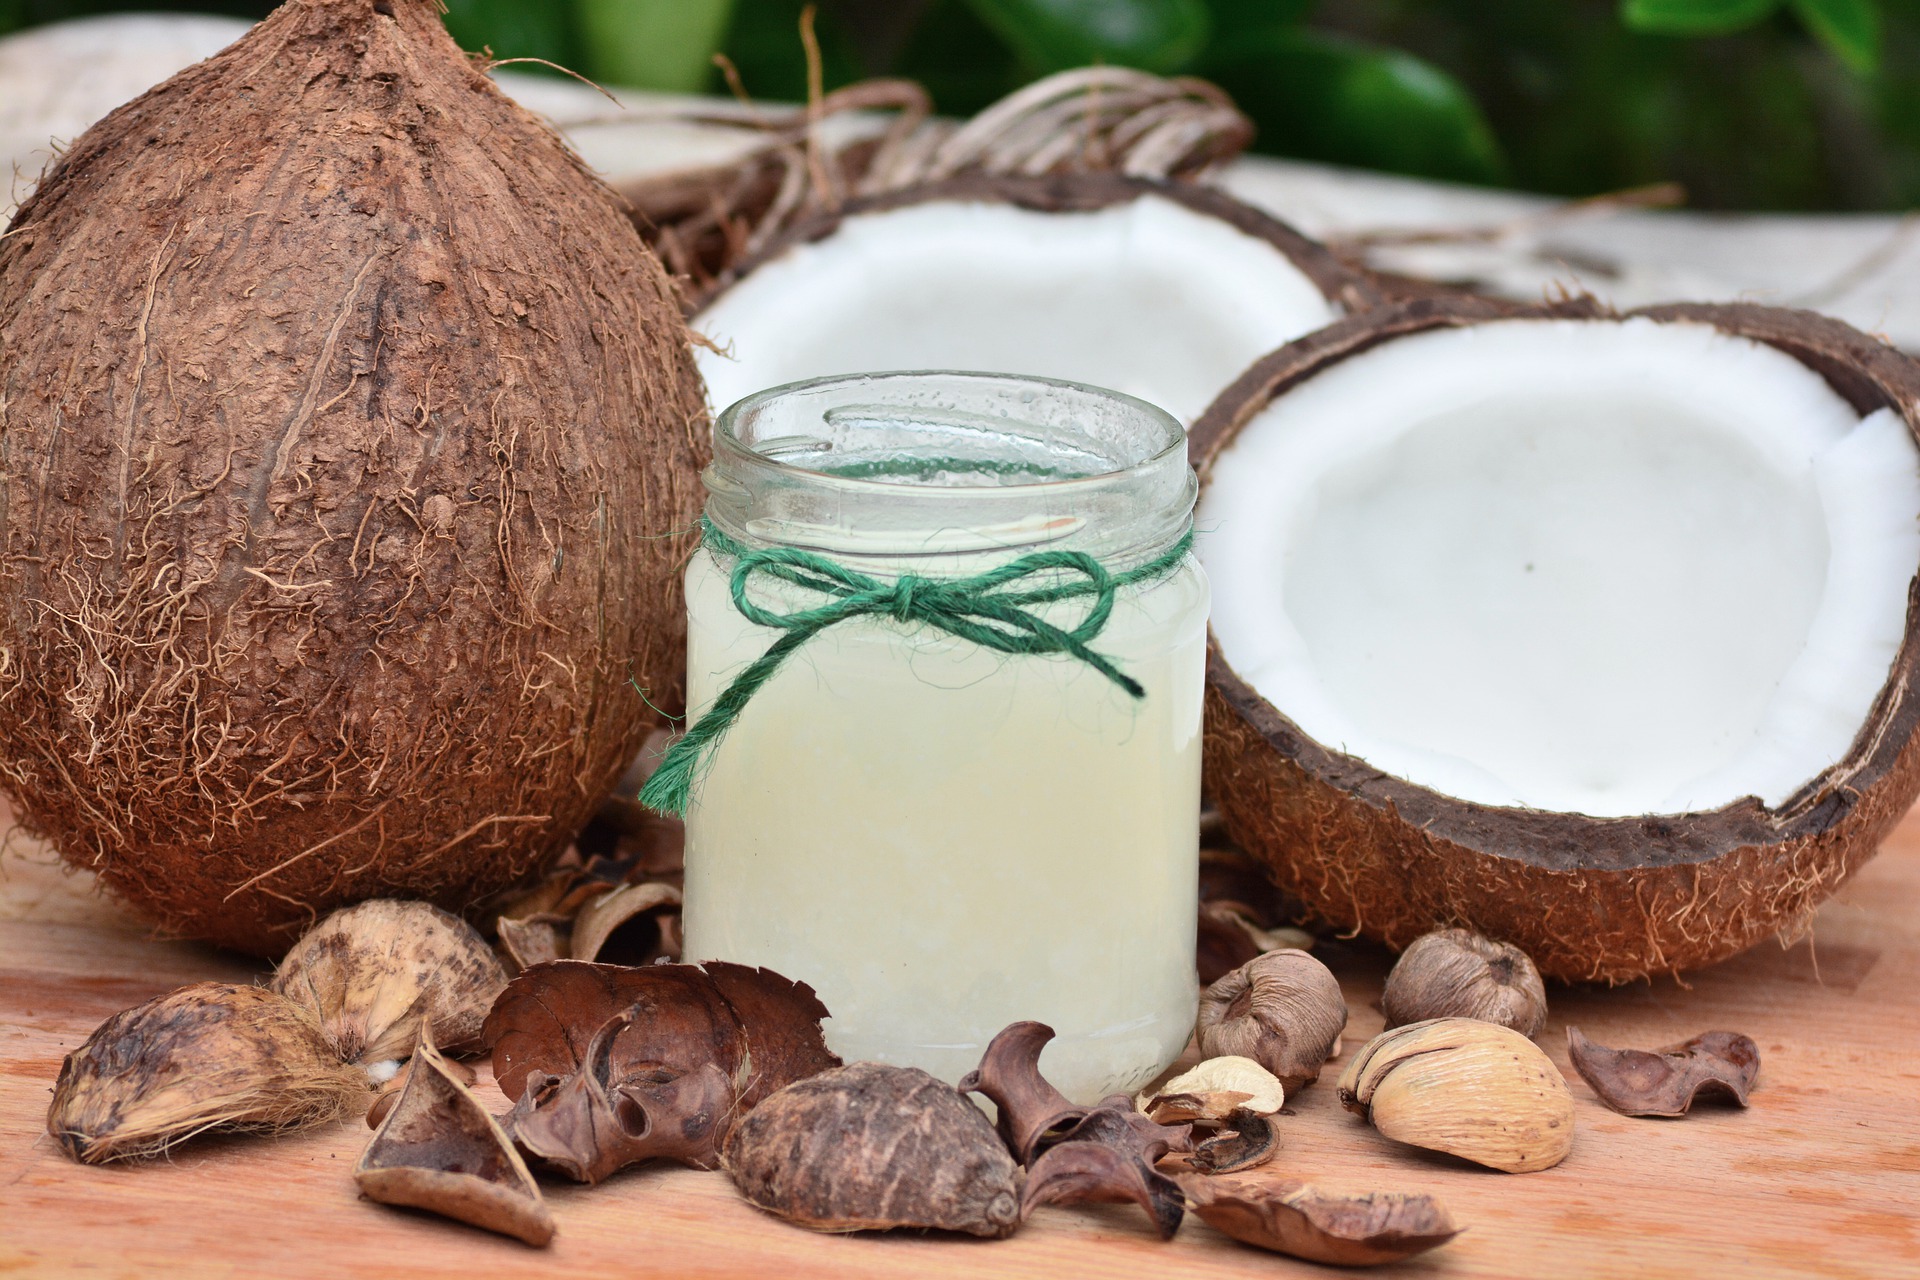 Coconut oil Benefits: My top 5 uses of Coconut Oil